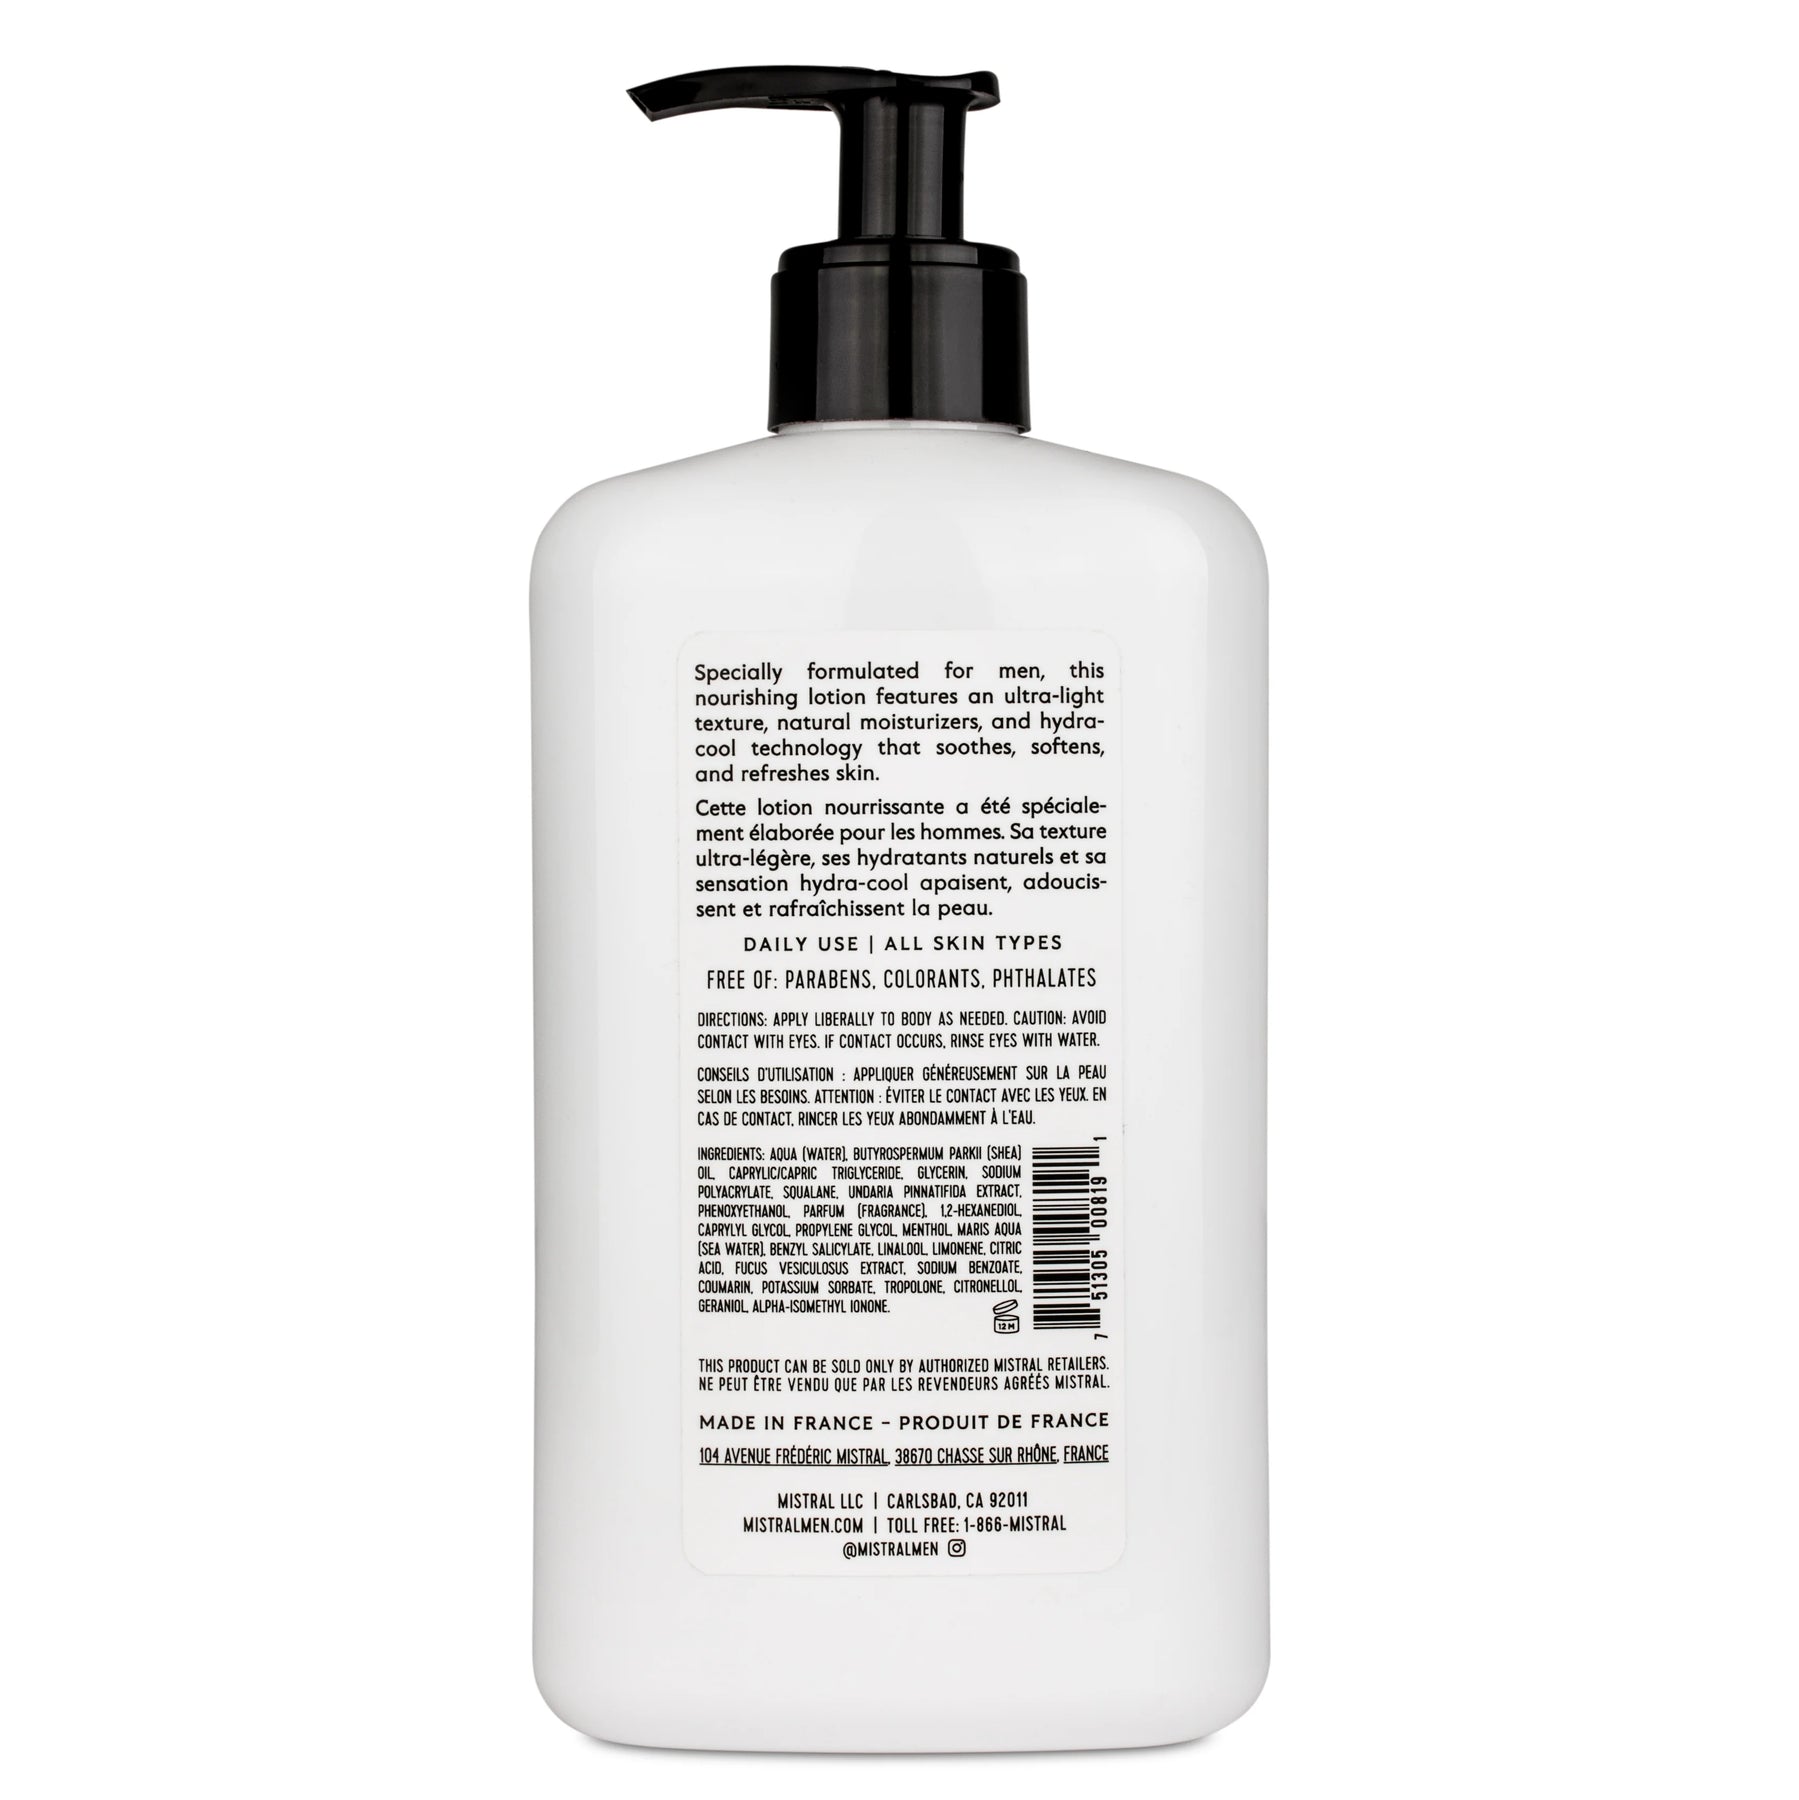 Mistral Hydra-Cool Body Lotion